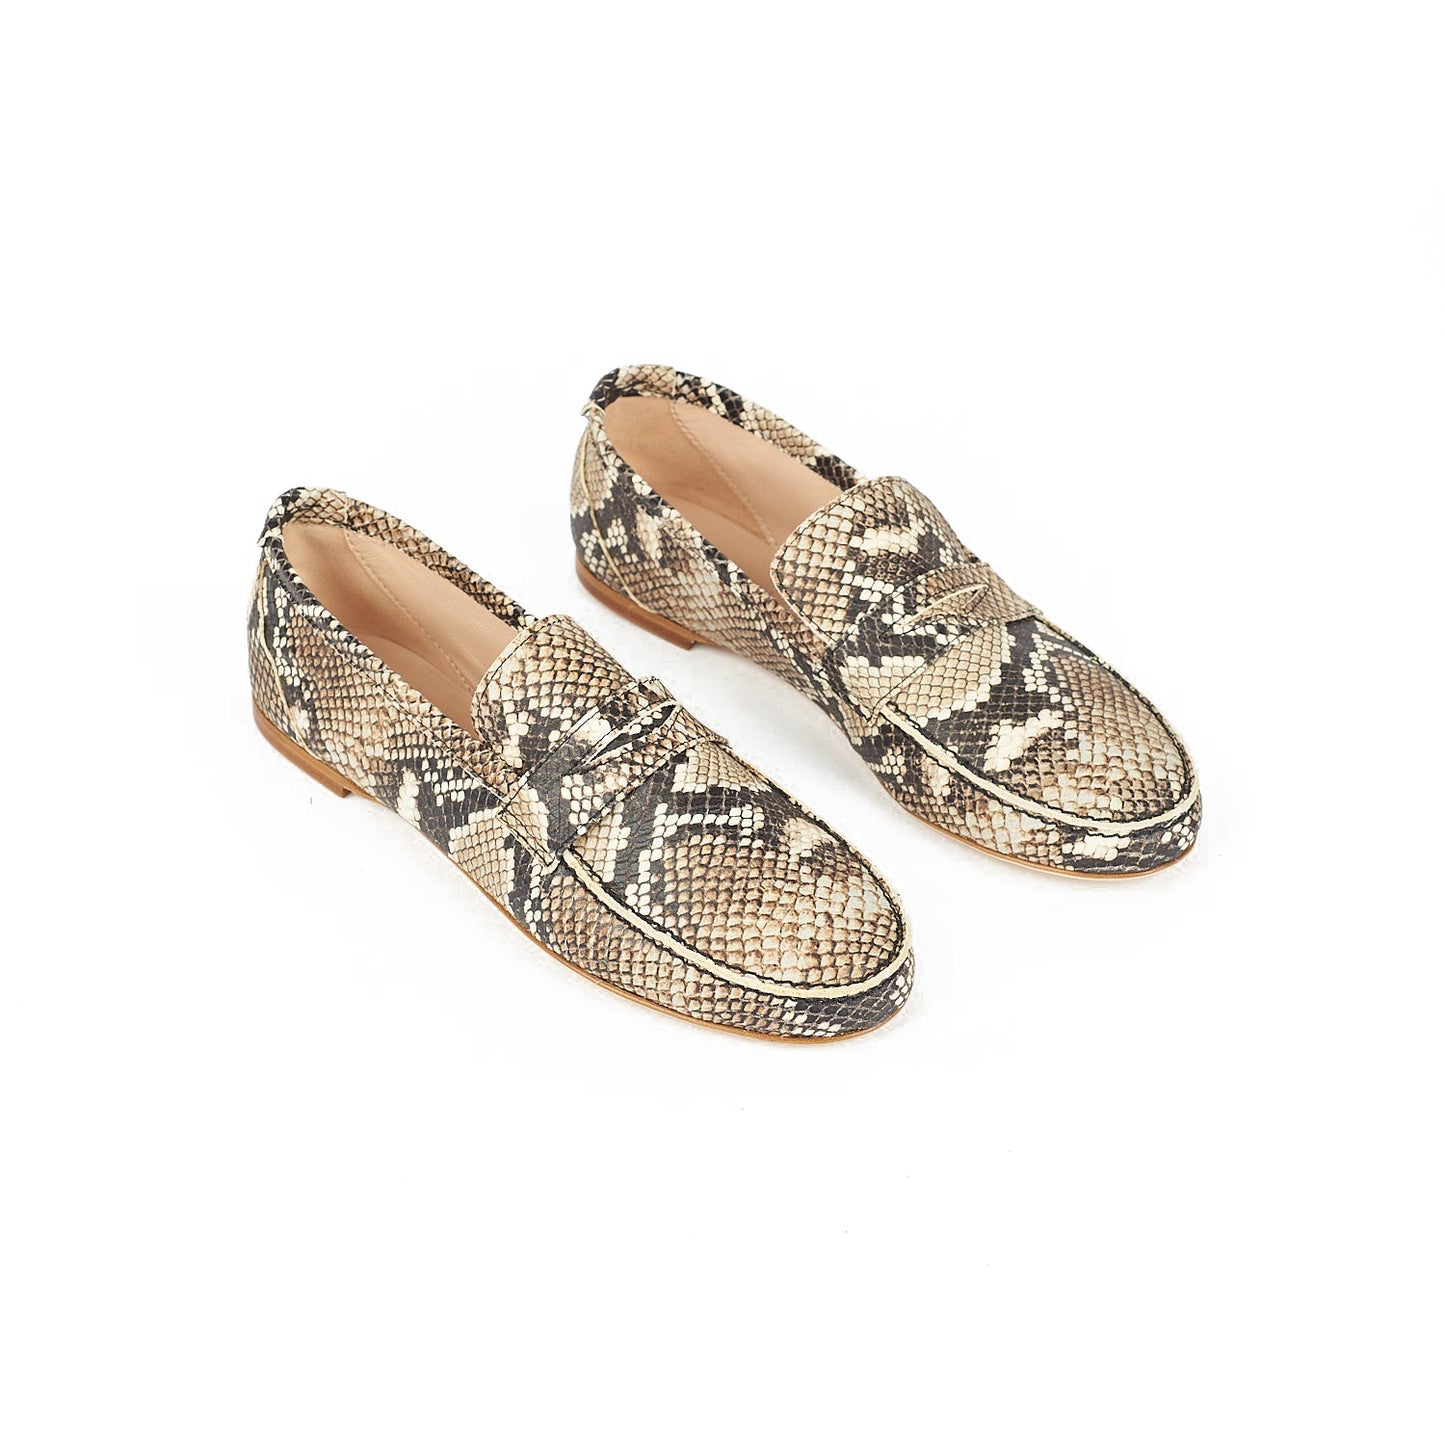 Embossed Penny Loafer in Python